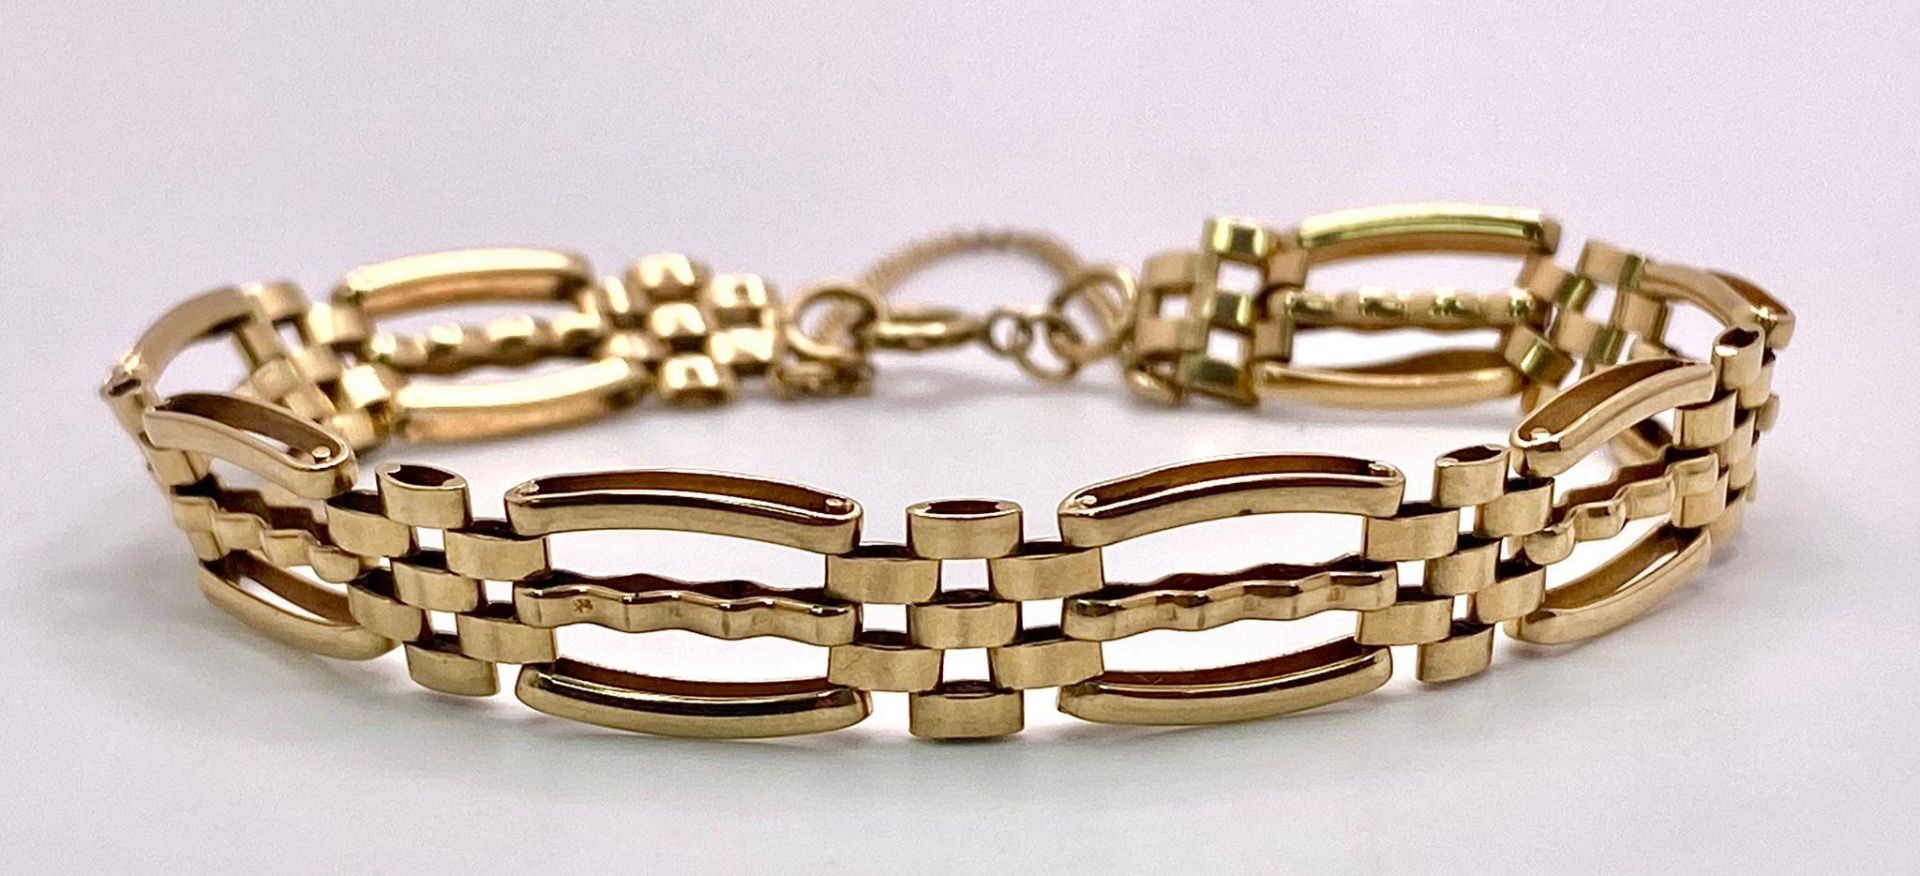 A 9K Yellow Gold Fancy Gate-Link Bracelet. 17cm length. 9.75g total weight. - Image 2 of 4